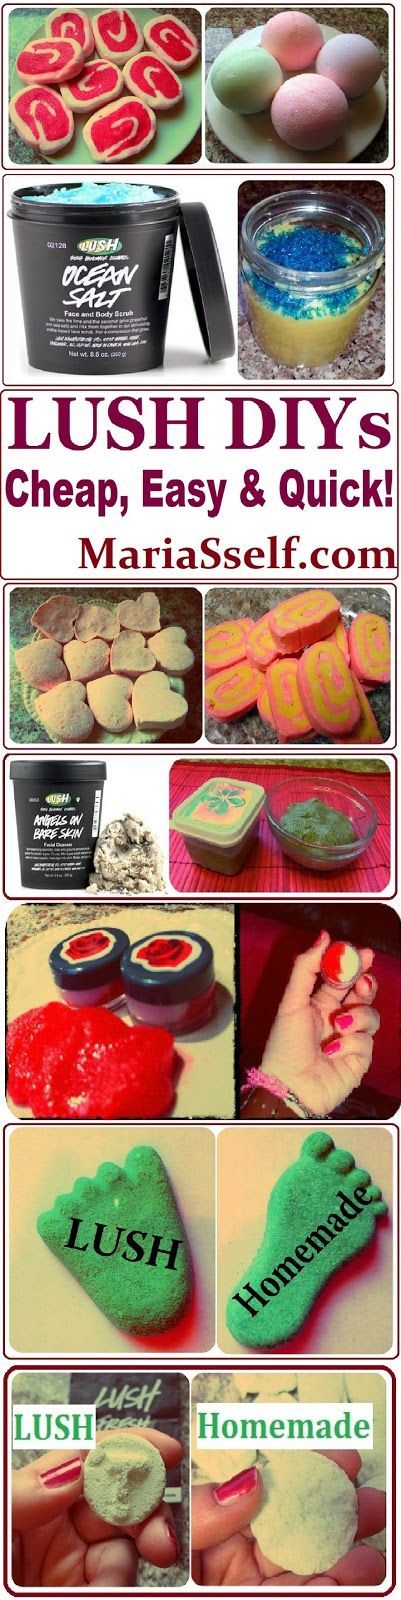 DIY LUSH Product Recipes, How to Make them CHEAP, EASY &amp; QUICK